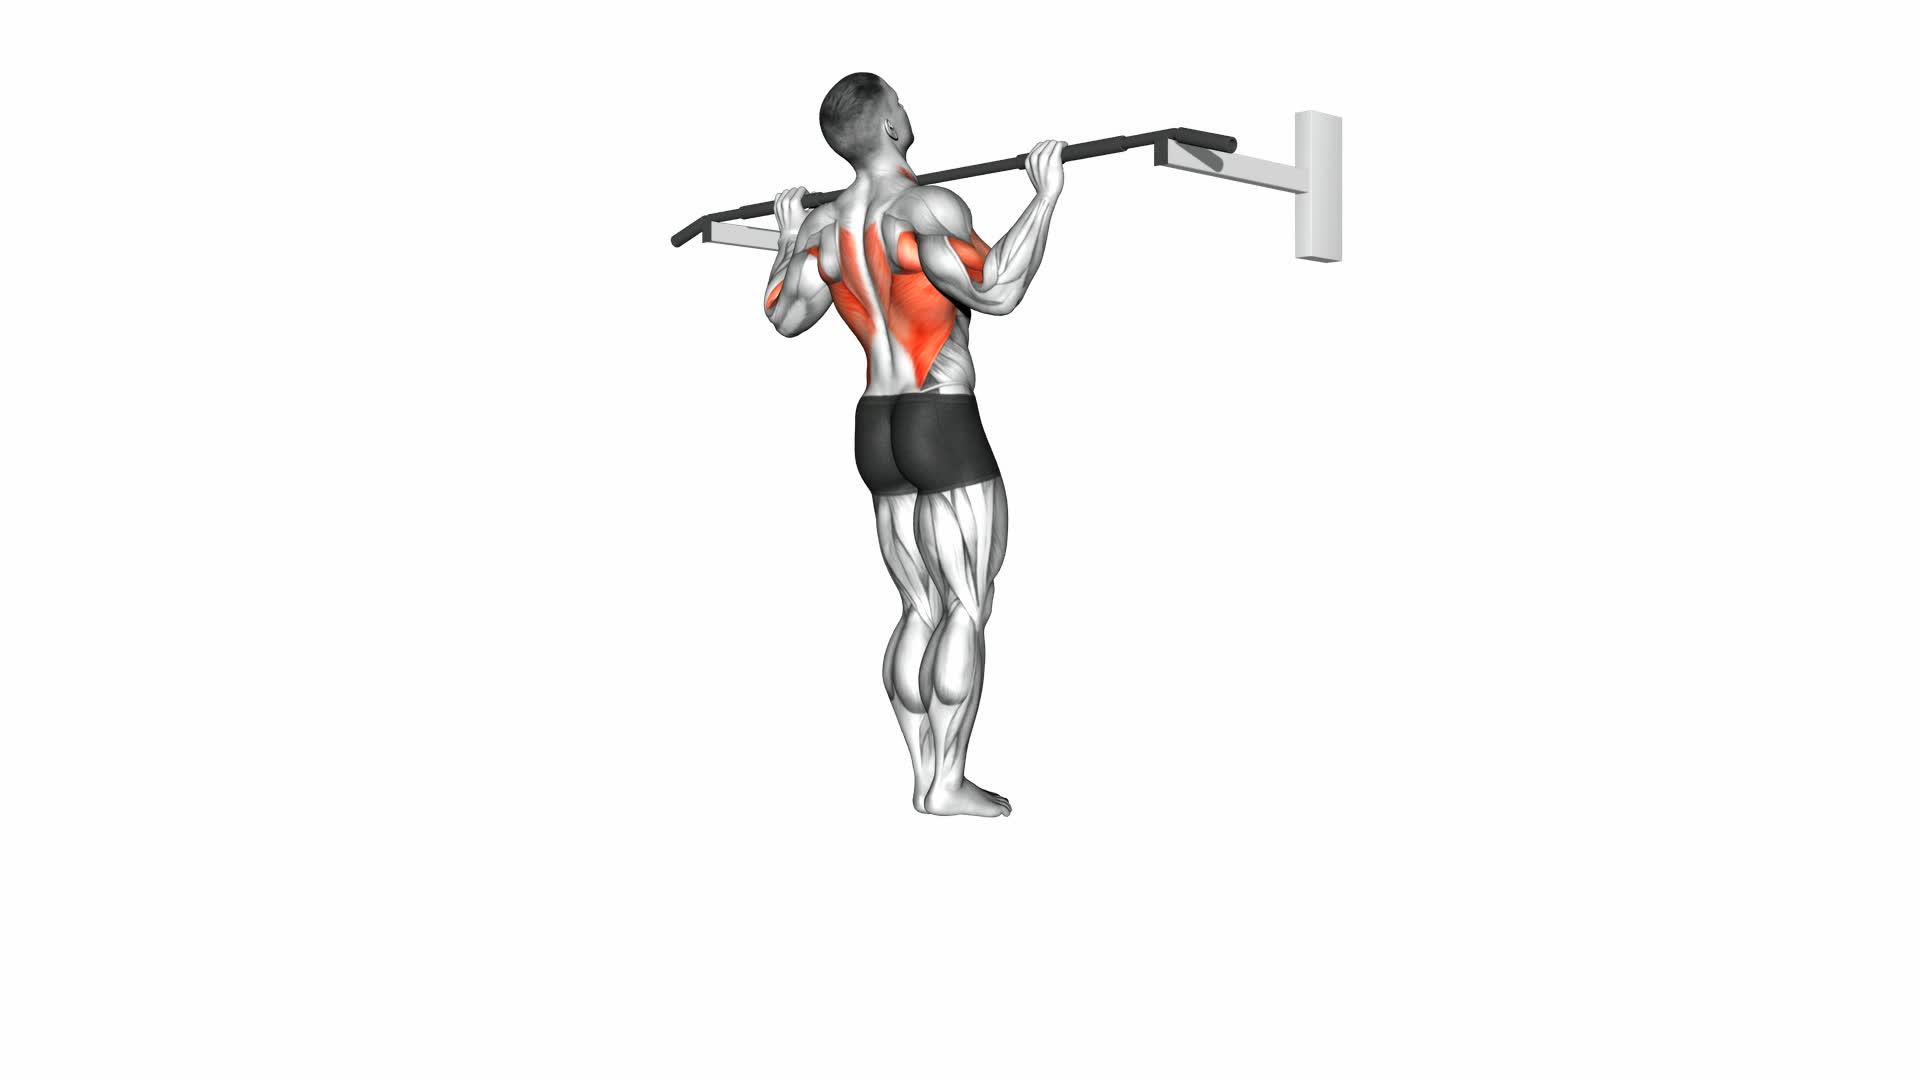 Wide-Grip Pull-Up - Video Exercise Guide & Tips